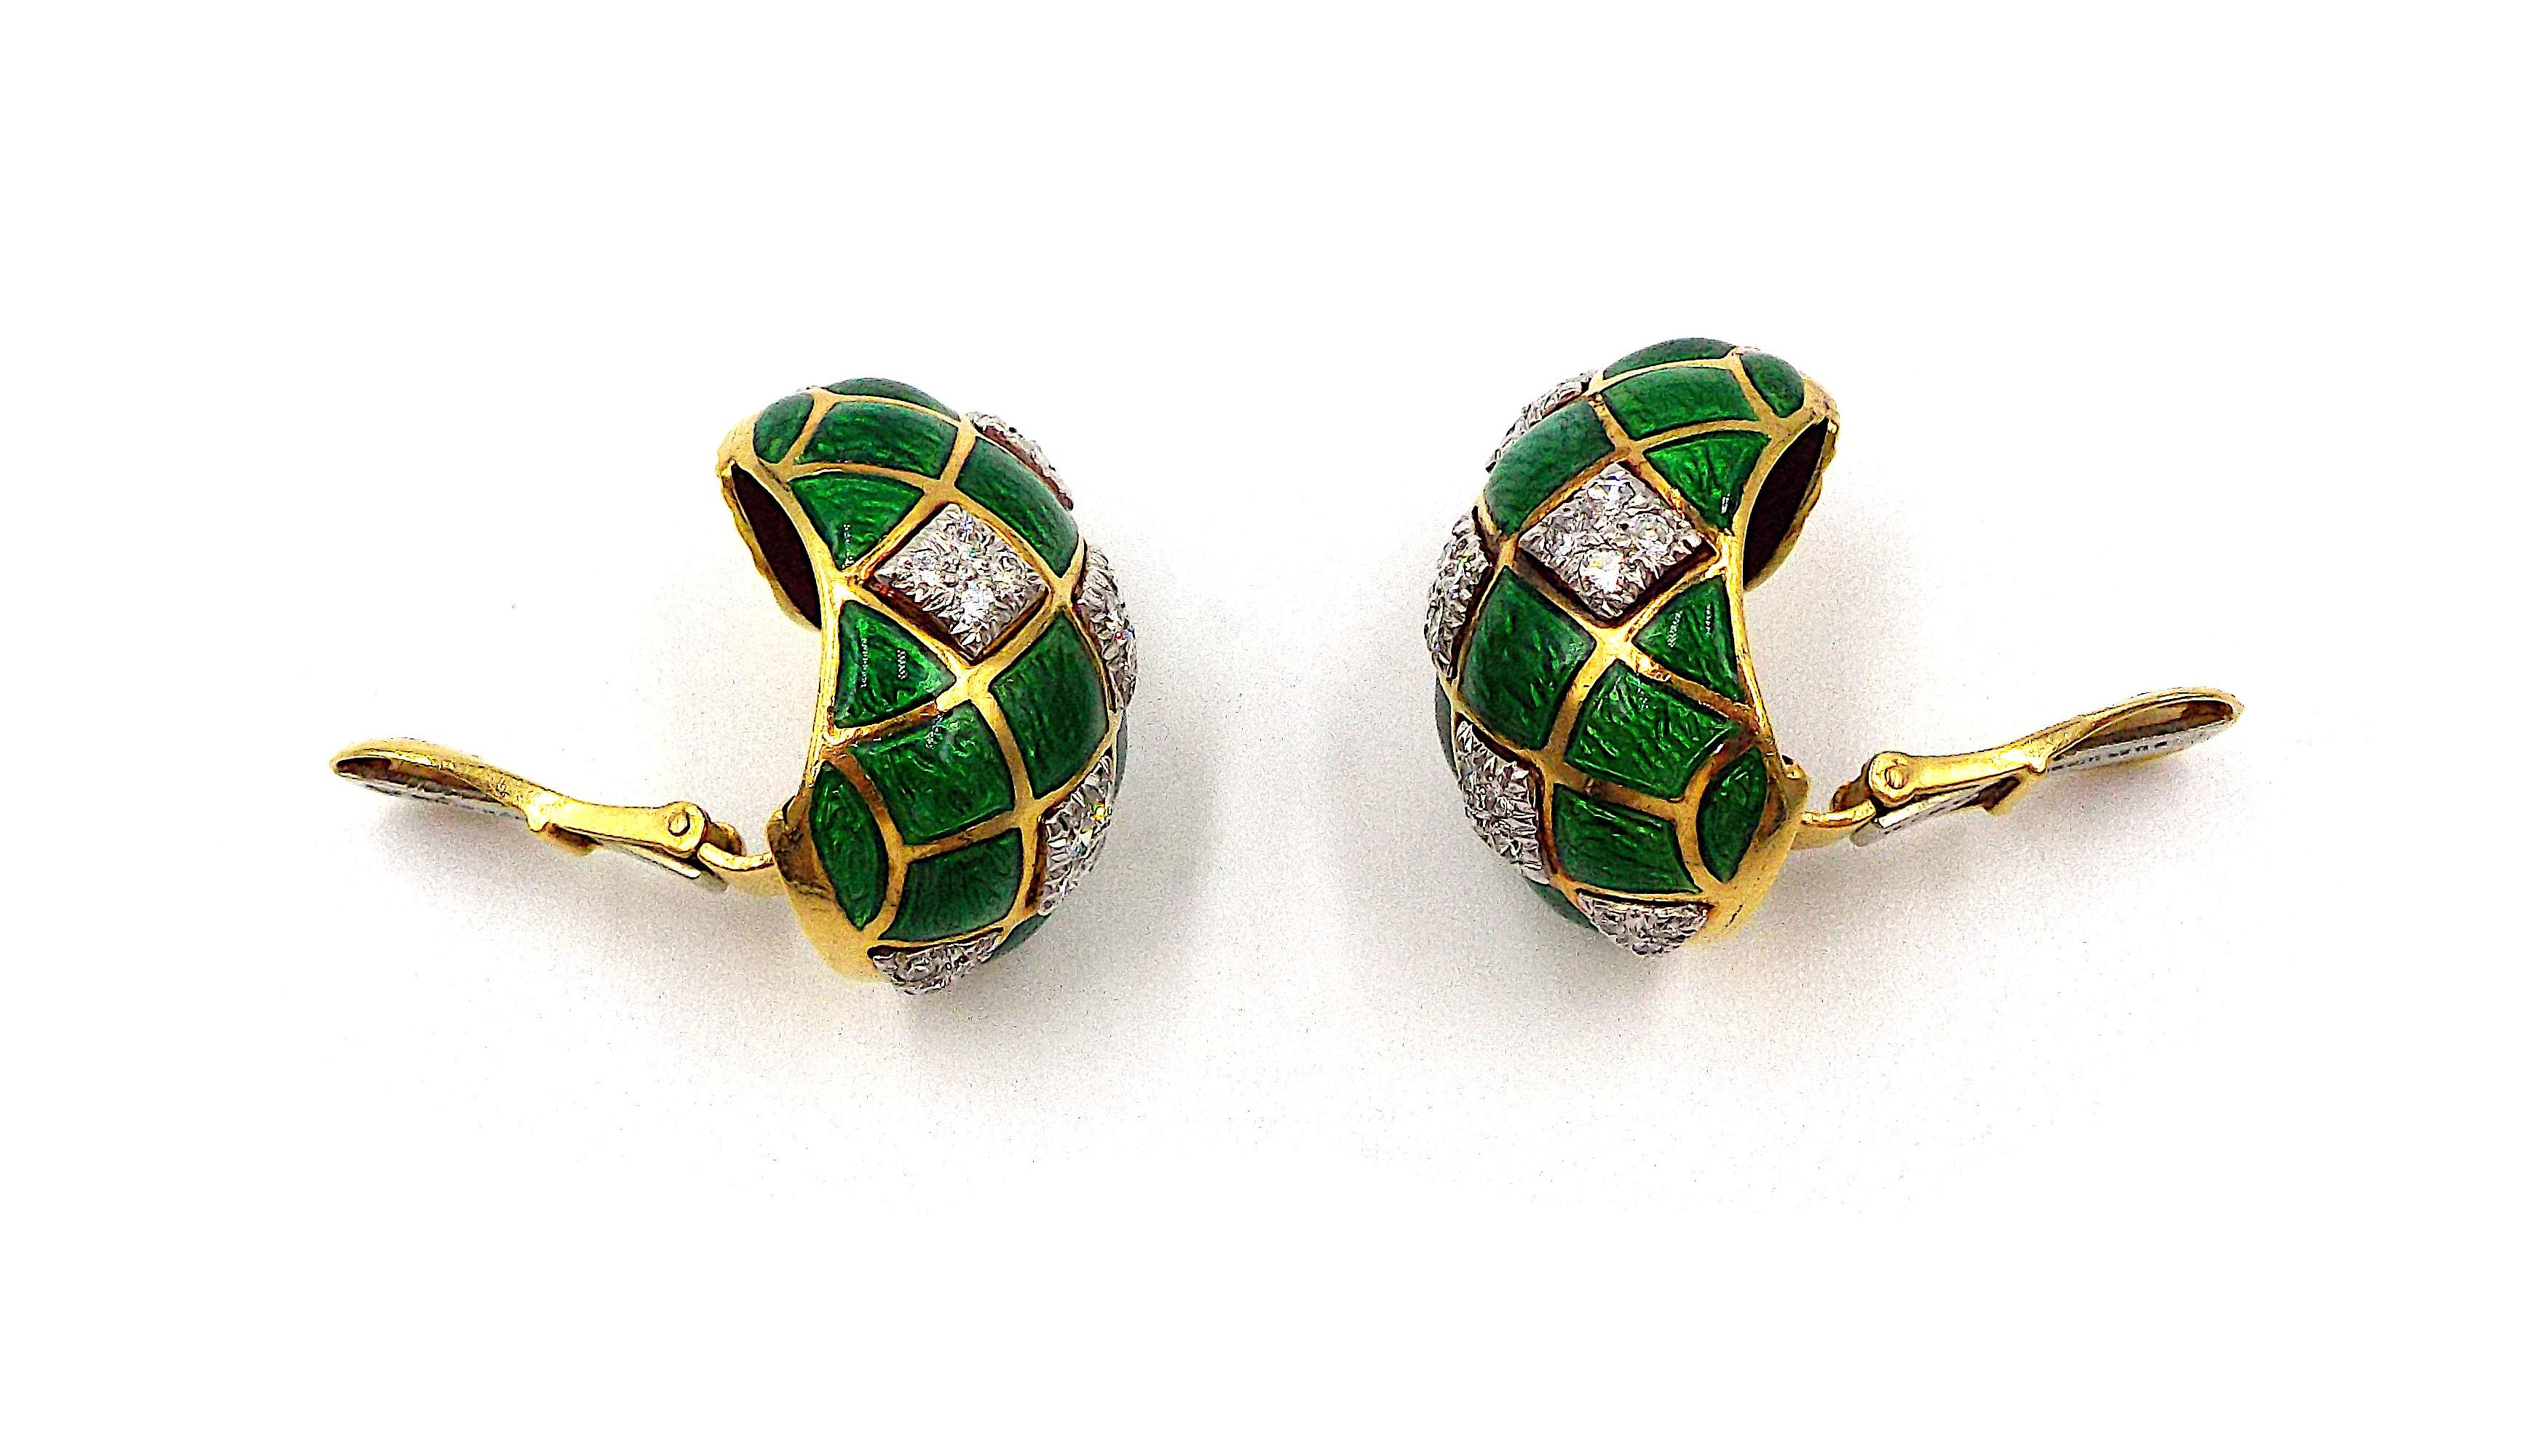 A pair of fancy earrings by David Webb featuring alternating squares of green enamel and diamond clusters set in platinum and 18K yellow gold. Signed David Webb, marked 18K, Plat. Each earring weighs 13.9 grams, dimensions 1